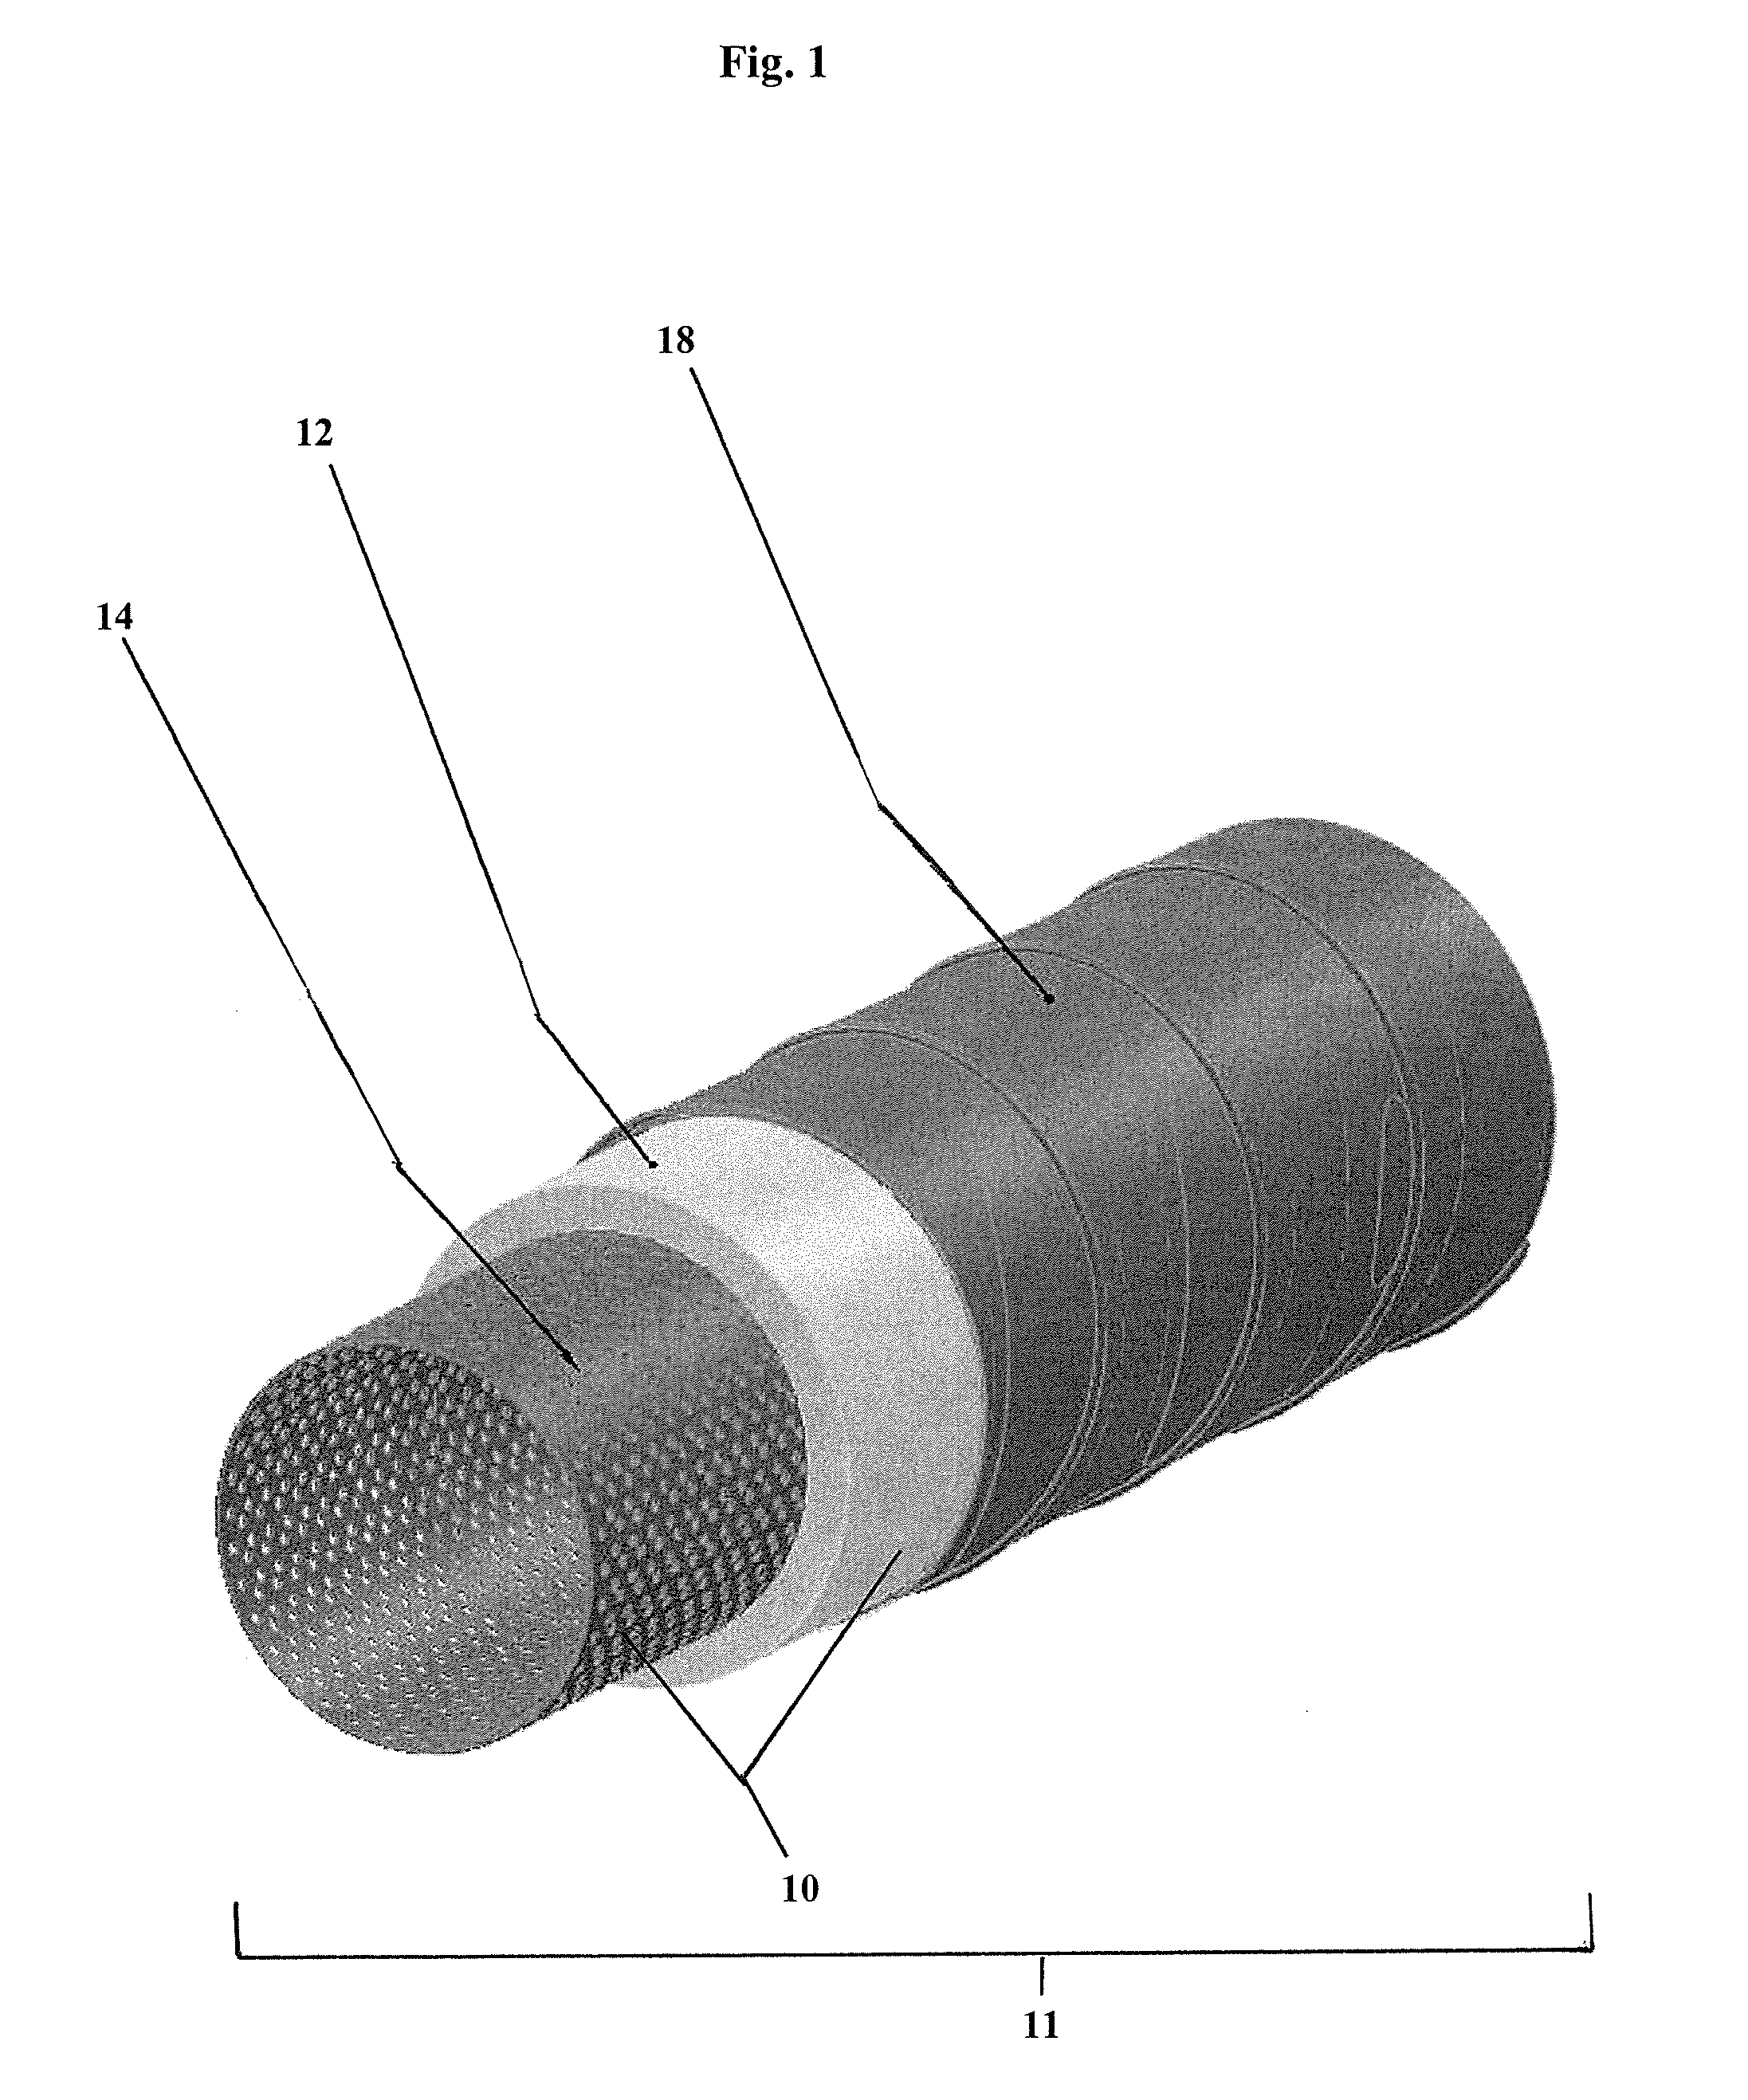 Foam insulation structure and method for insulating annular ducts